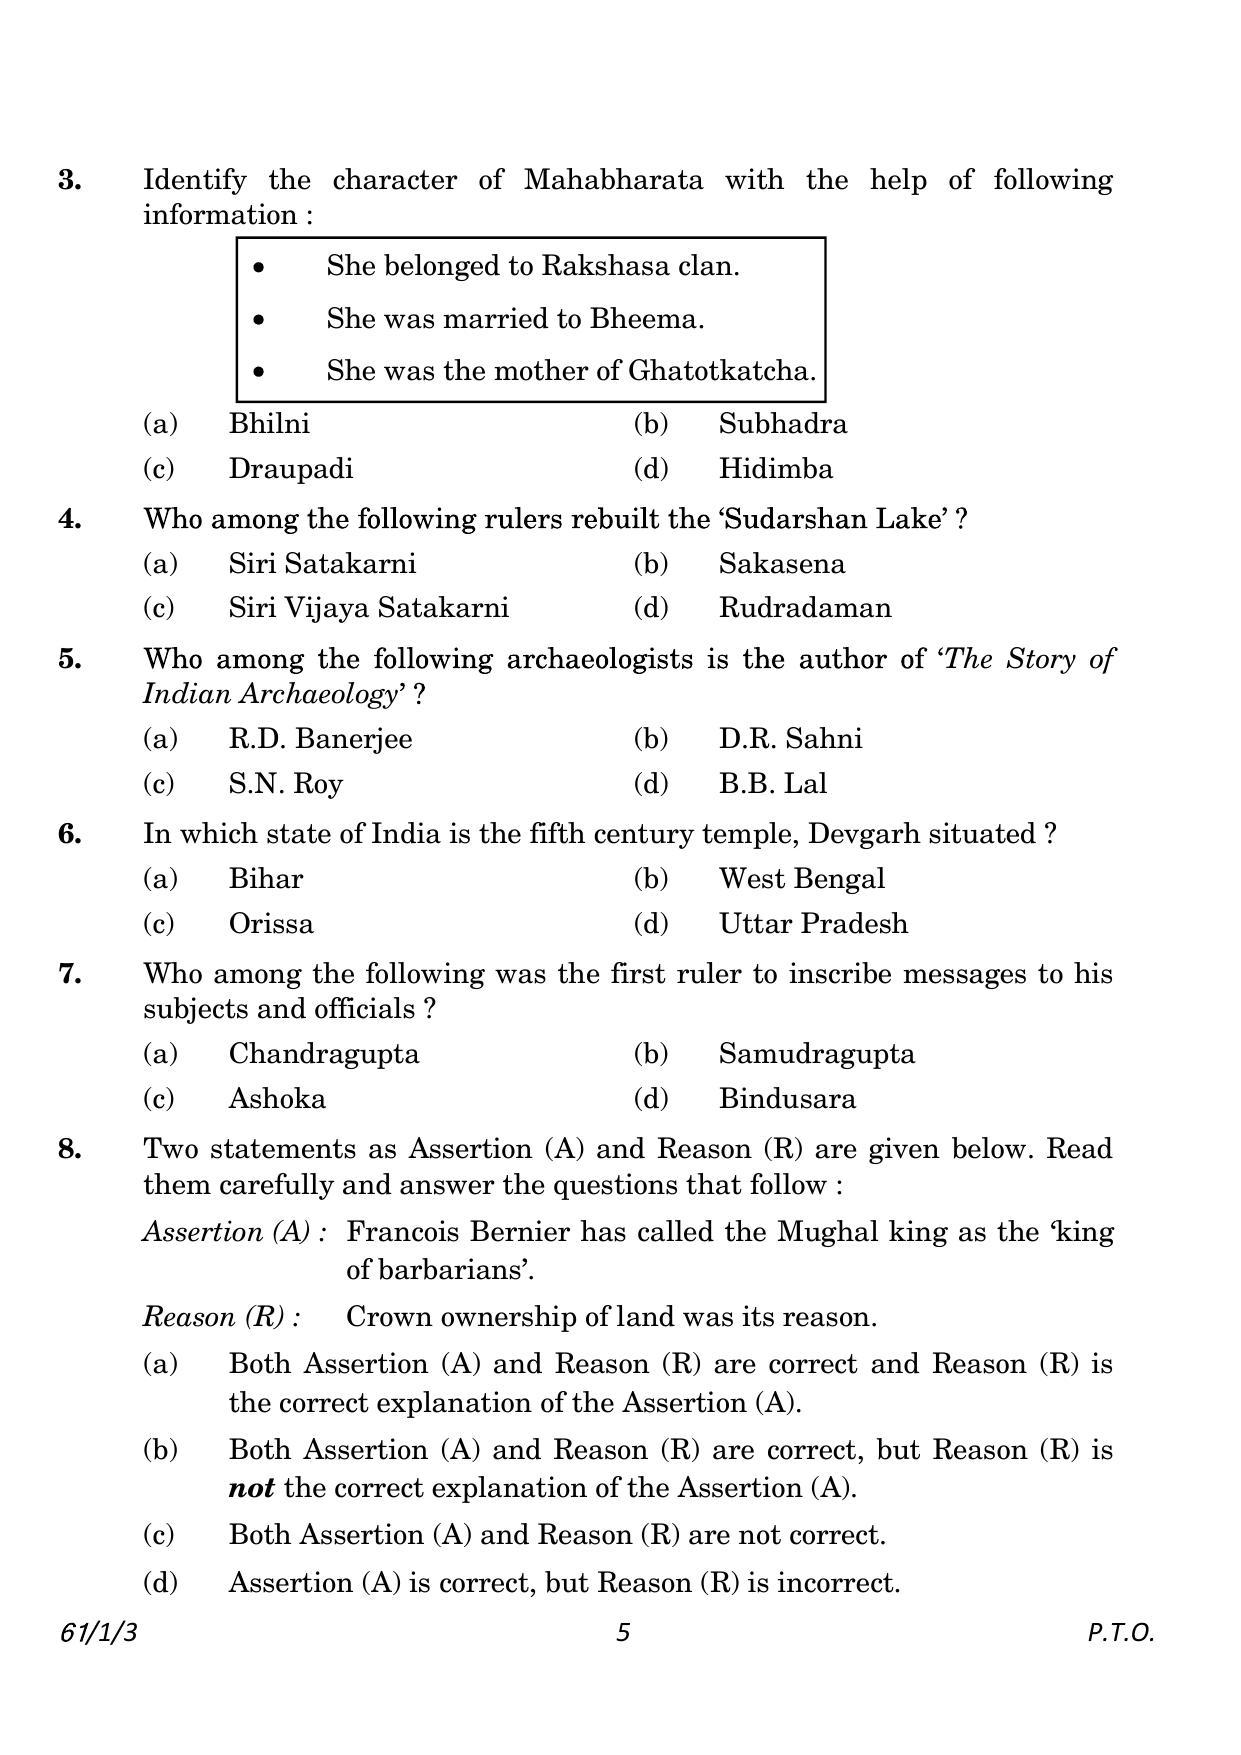 CBSE Class 12 61-1-3 History 2023 Question Paper - Page 5